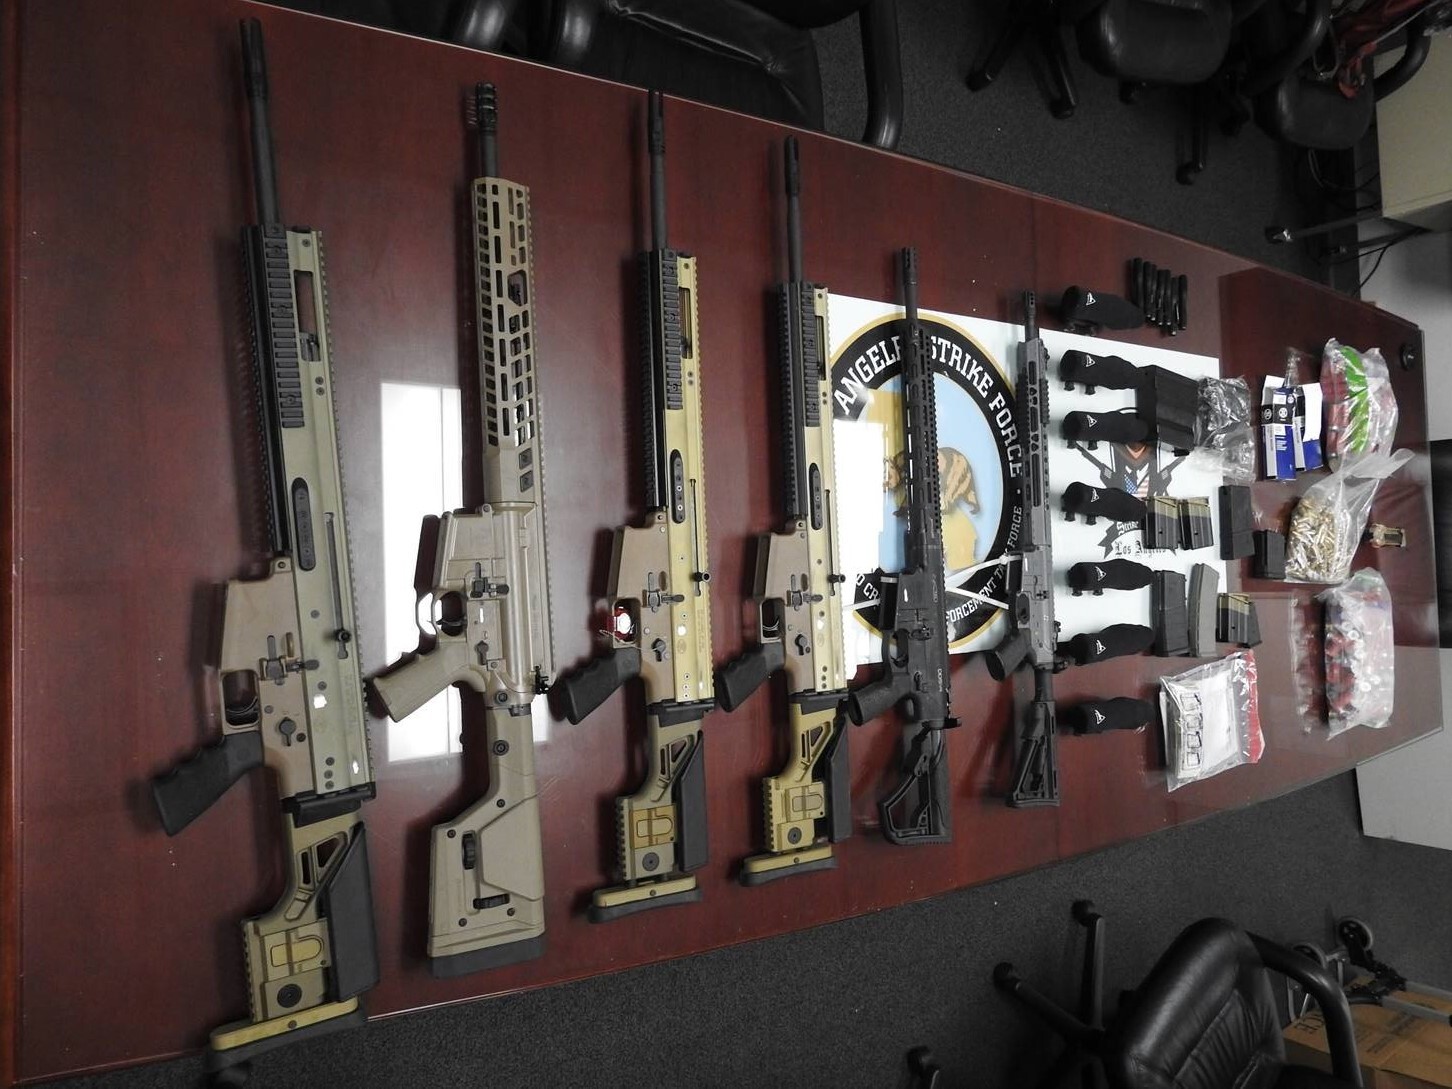 Whittier man is charged with smuggling guns destined for drug traffickers in Mexico